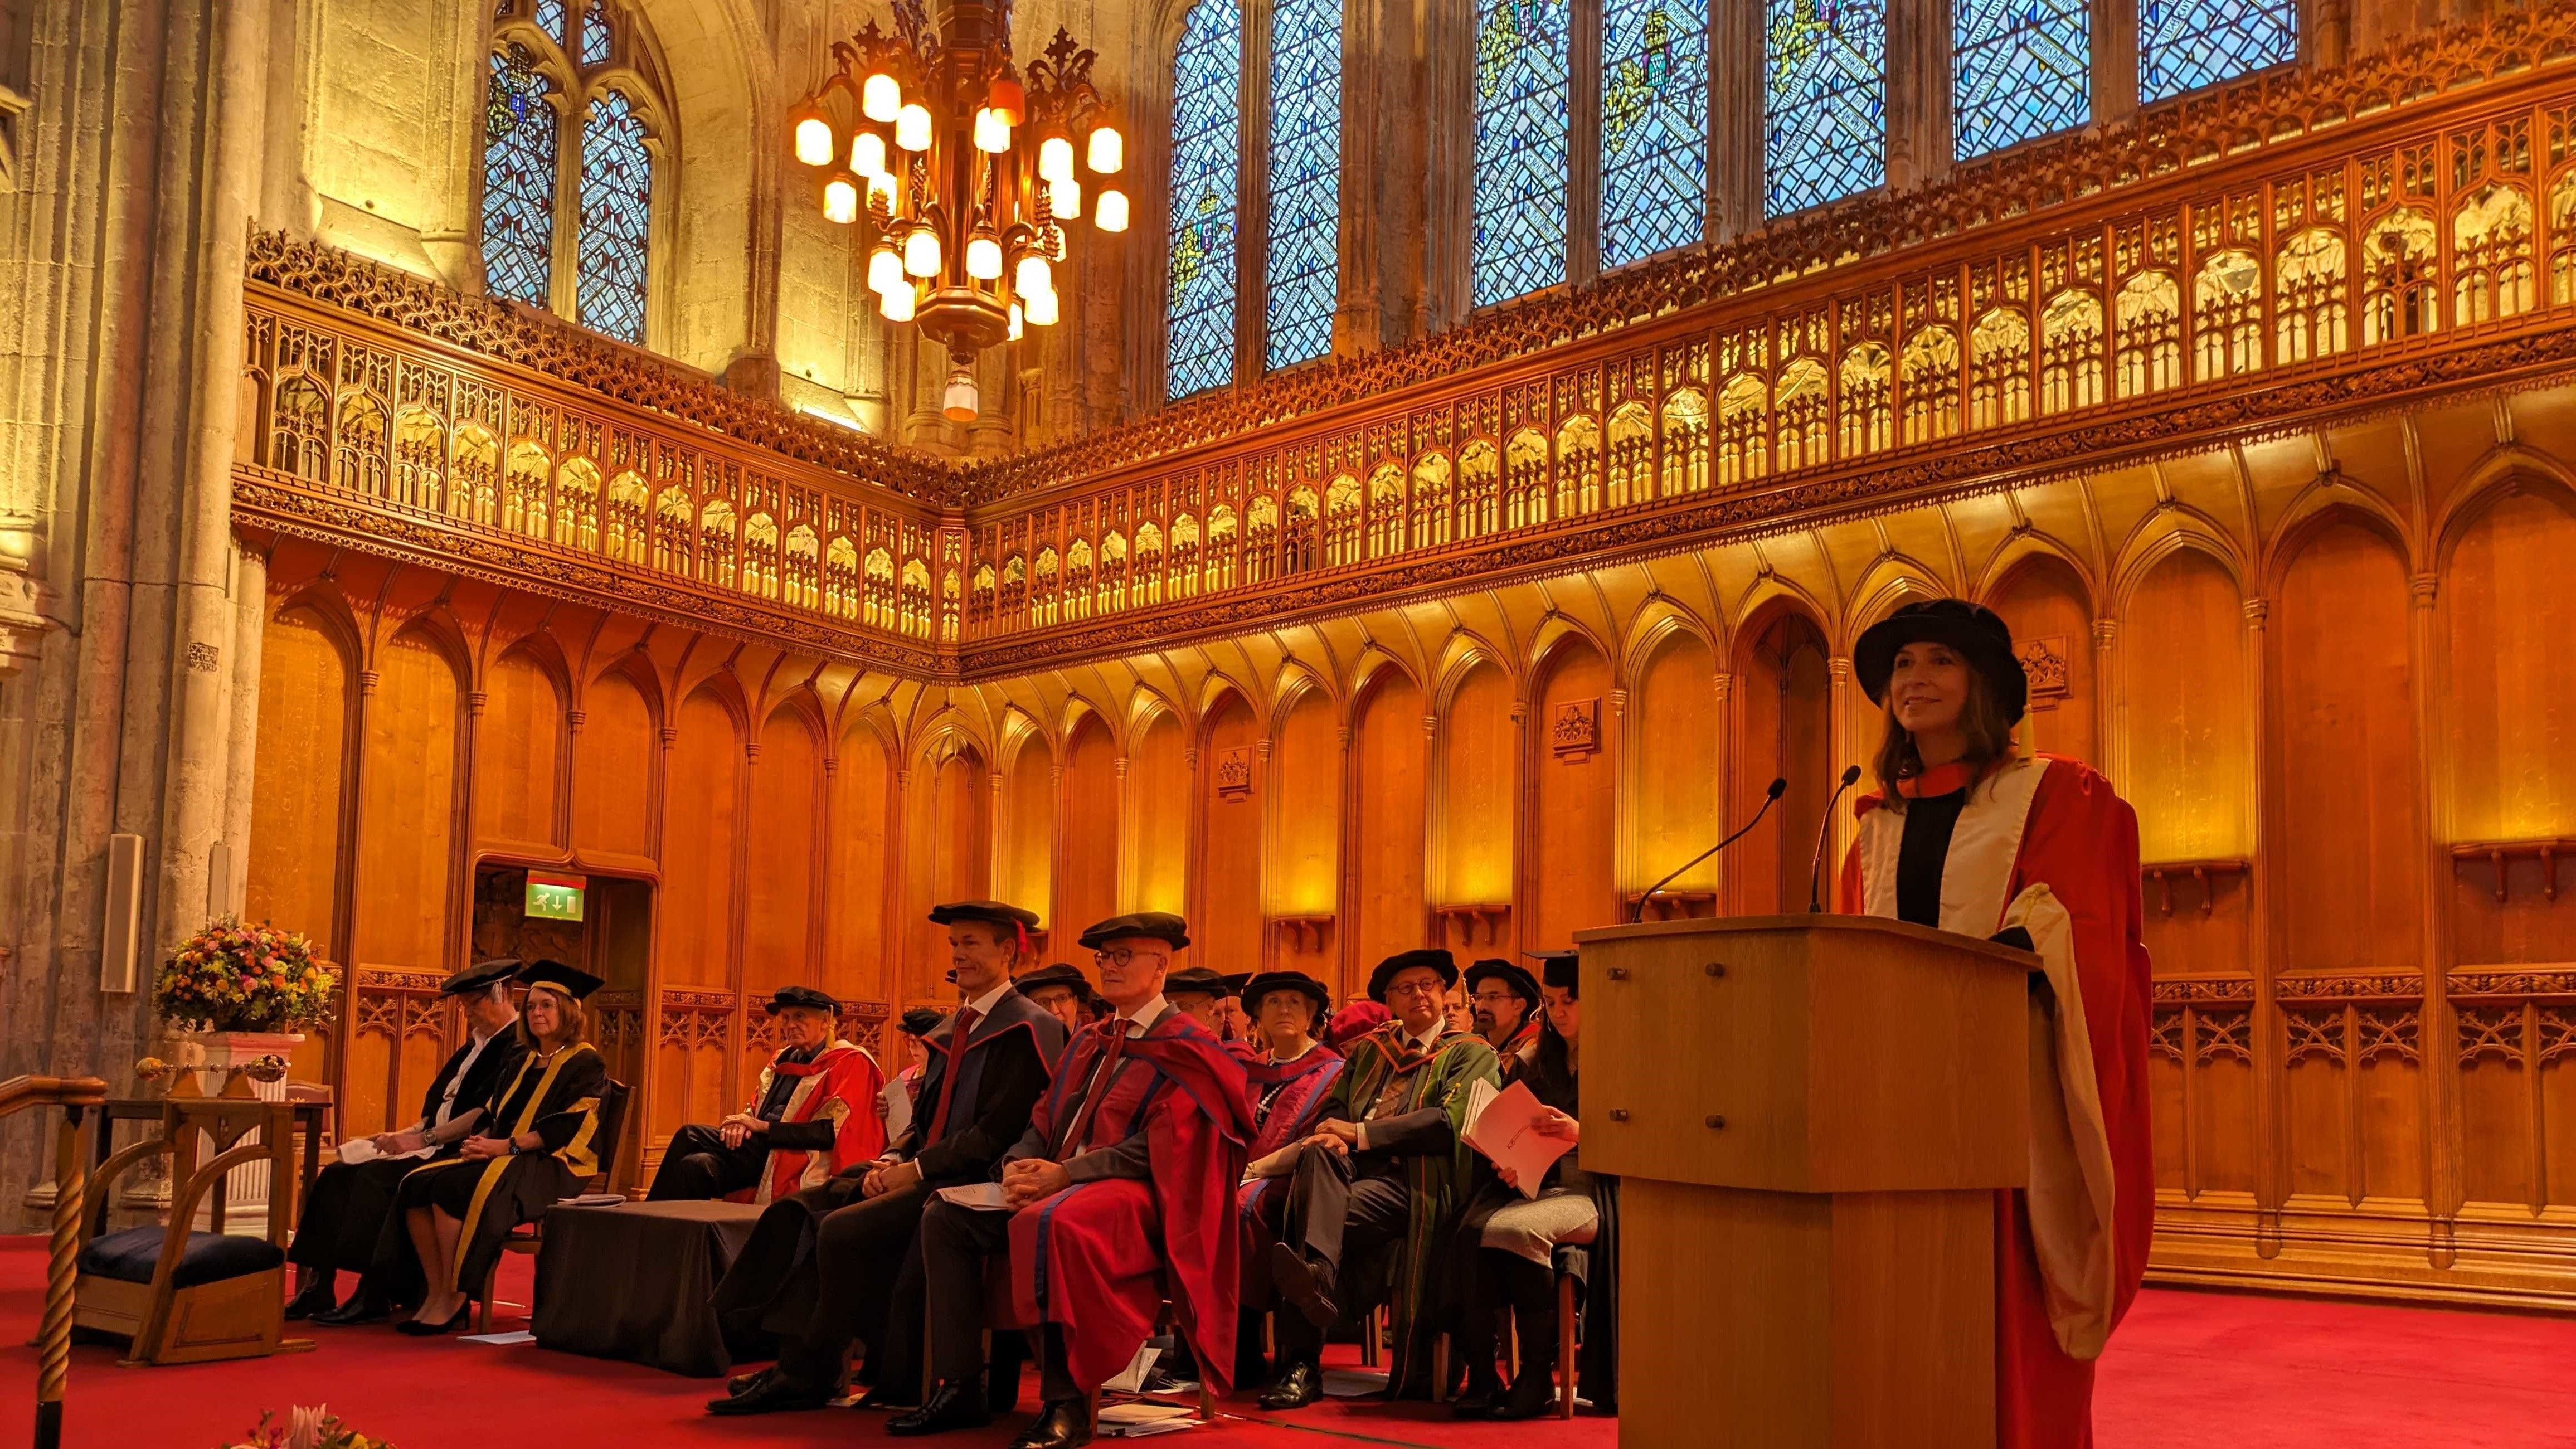 Lola Manterola speaking at the lectern after receiving an honorary doctorate.